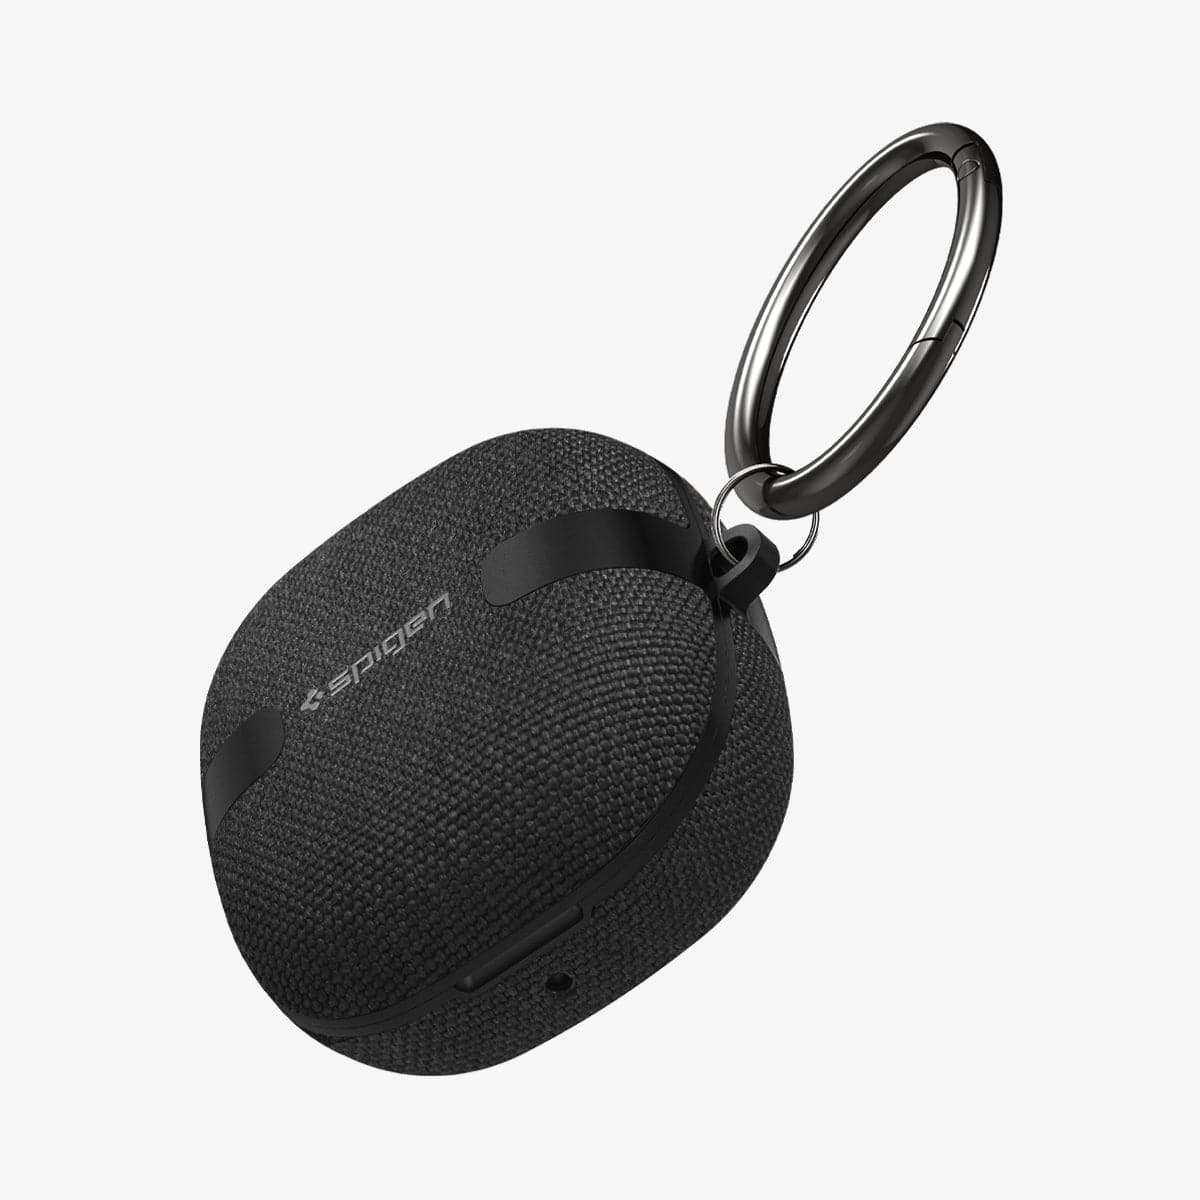 ASD01278 - Galaxy Buds 2 Pro / 2 / Pro / Live Case Urban Fit in black showing the top, front and carabiner